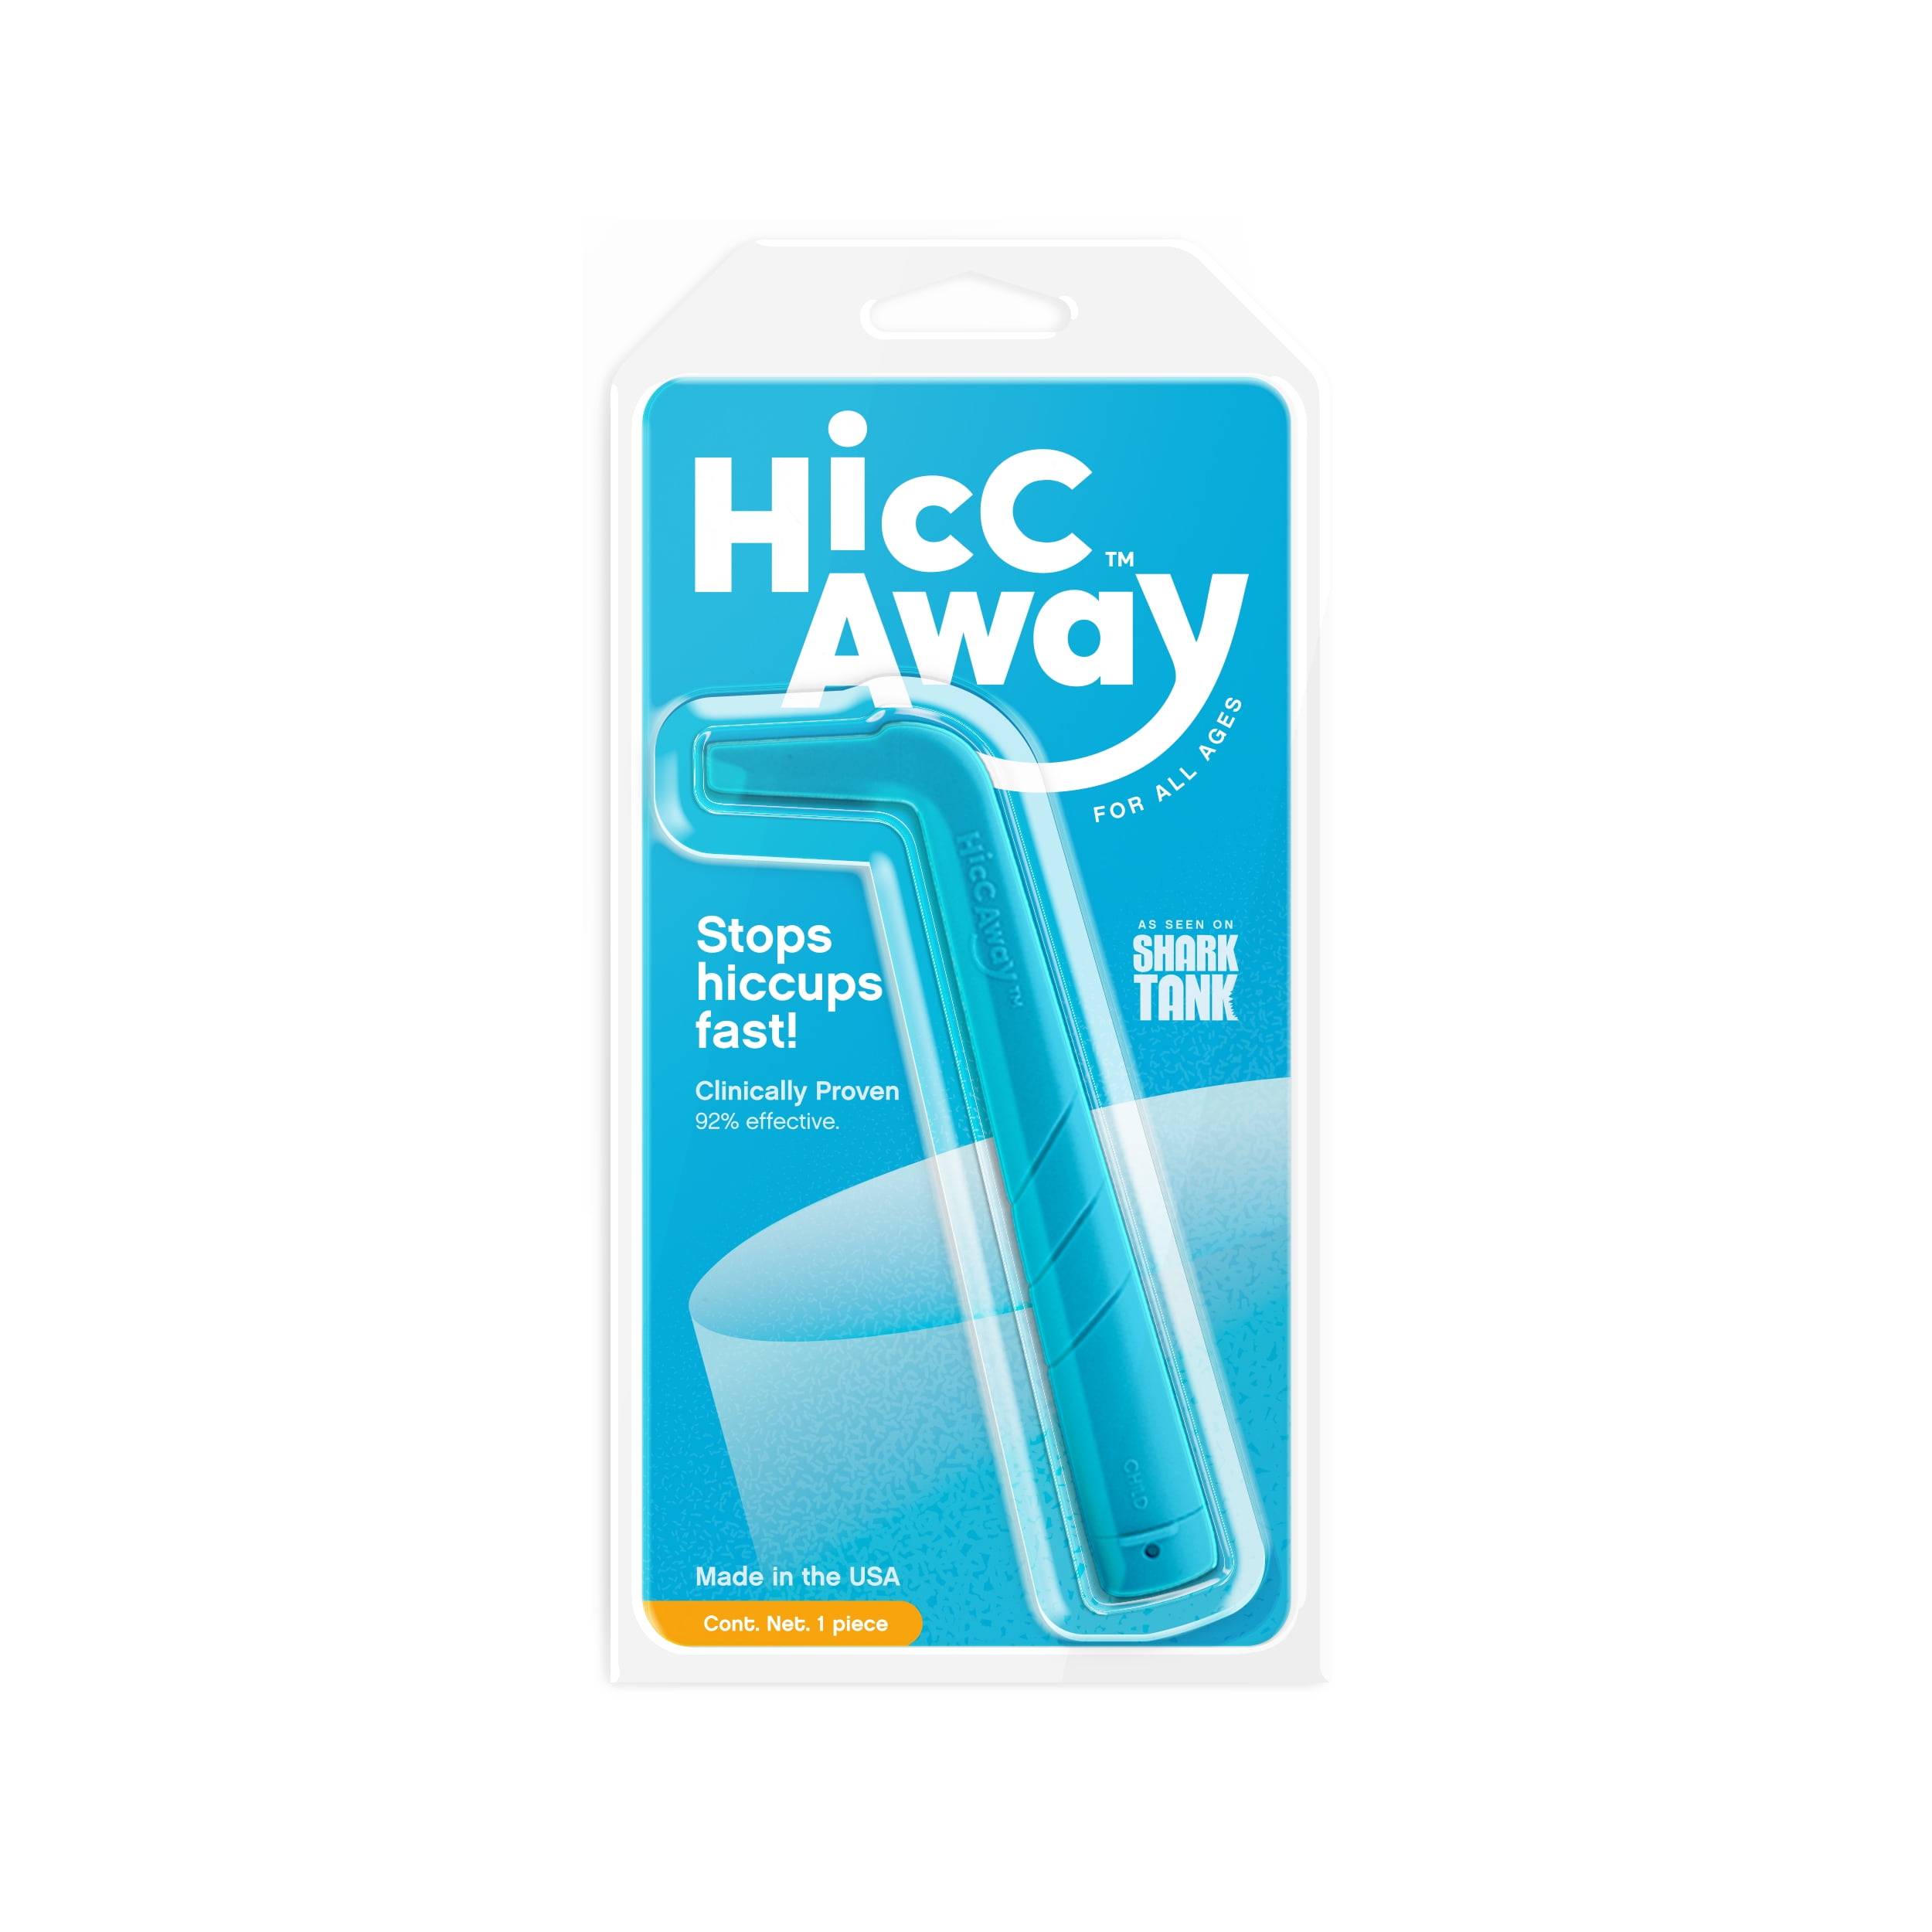 HiccAway on Instagram: We're excited for you to get hiccups so you can  give it a try! 😋